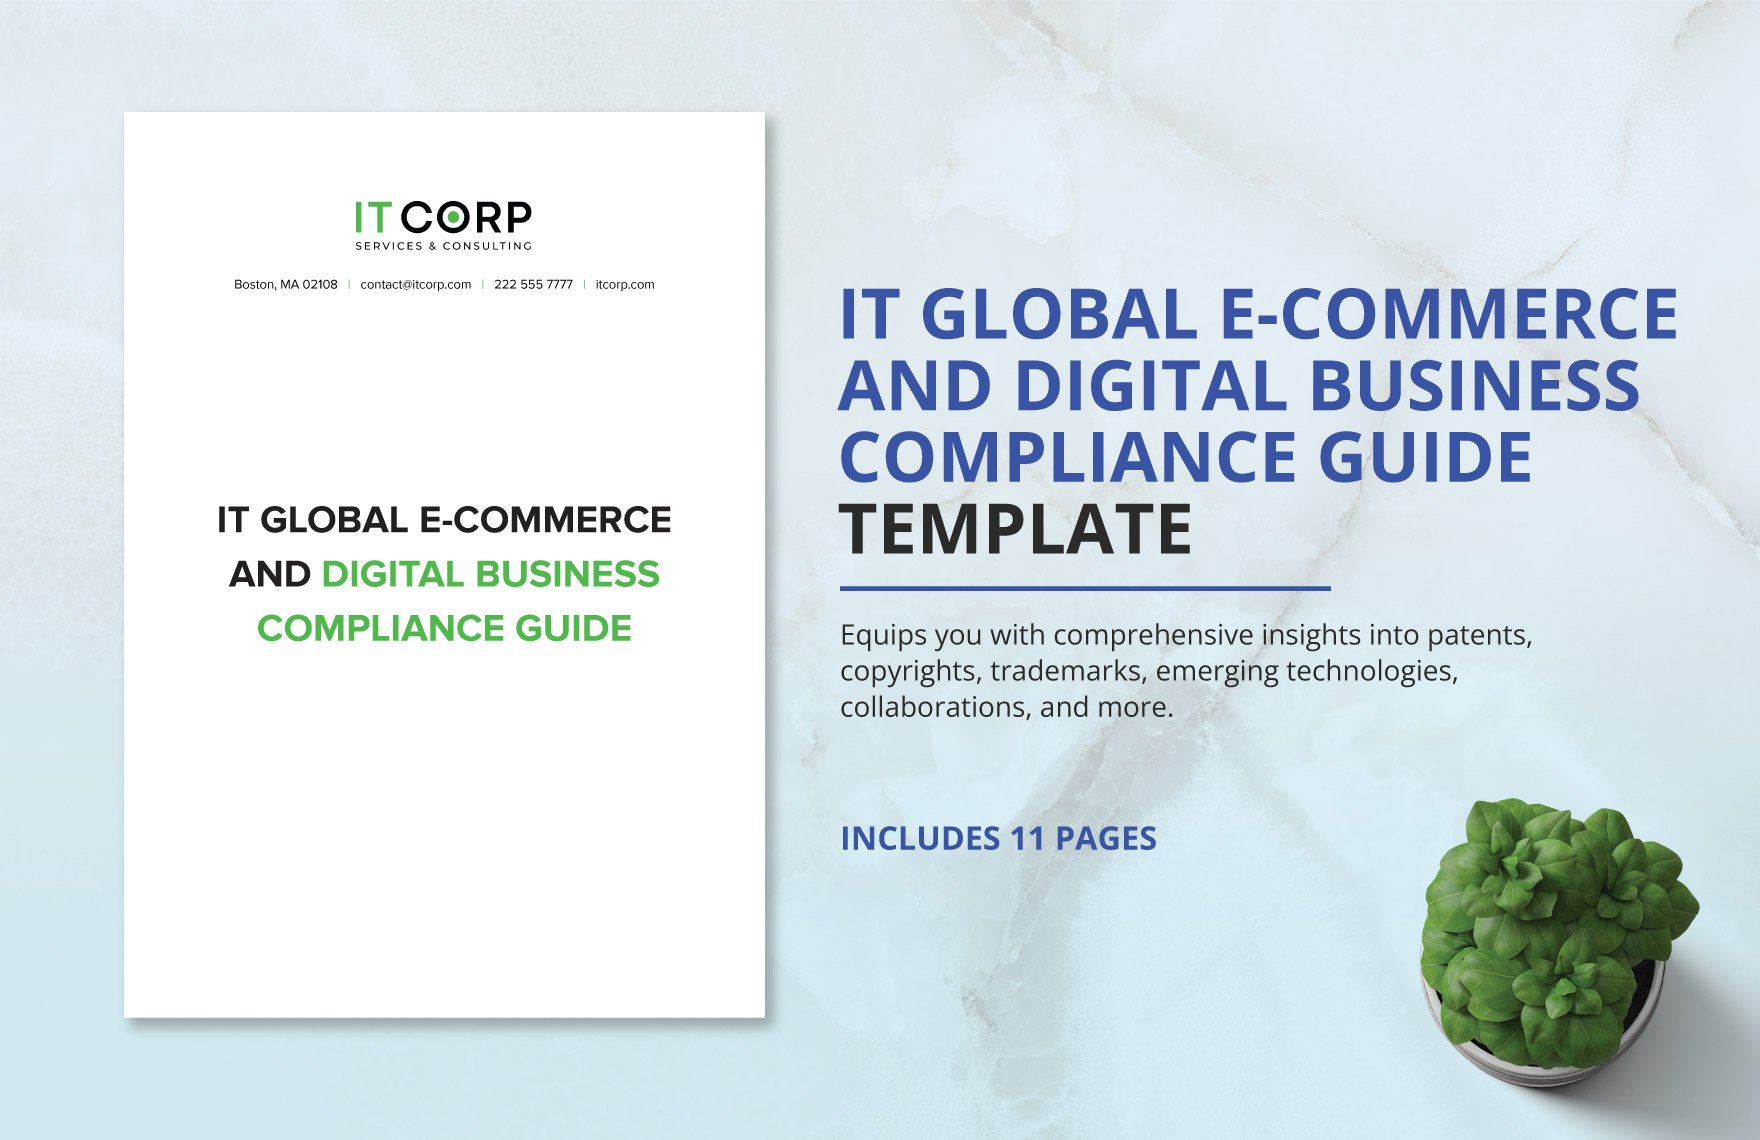  IT Global E-Commerce And Digital Business Compliance Guide Template